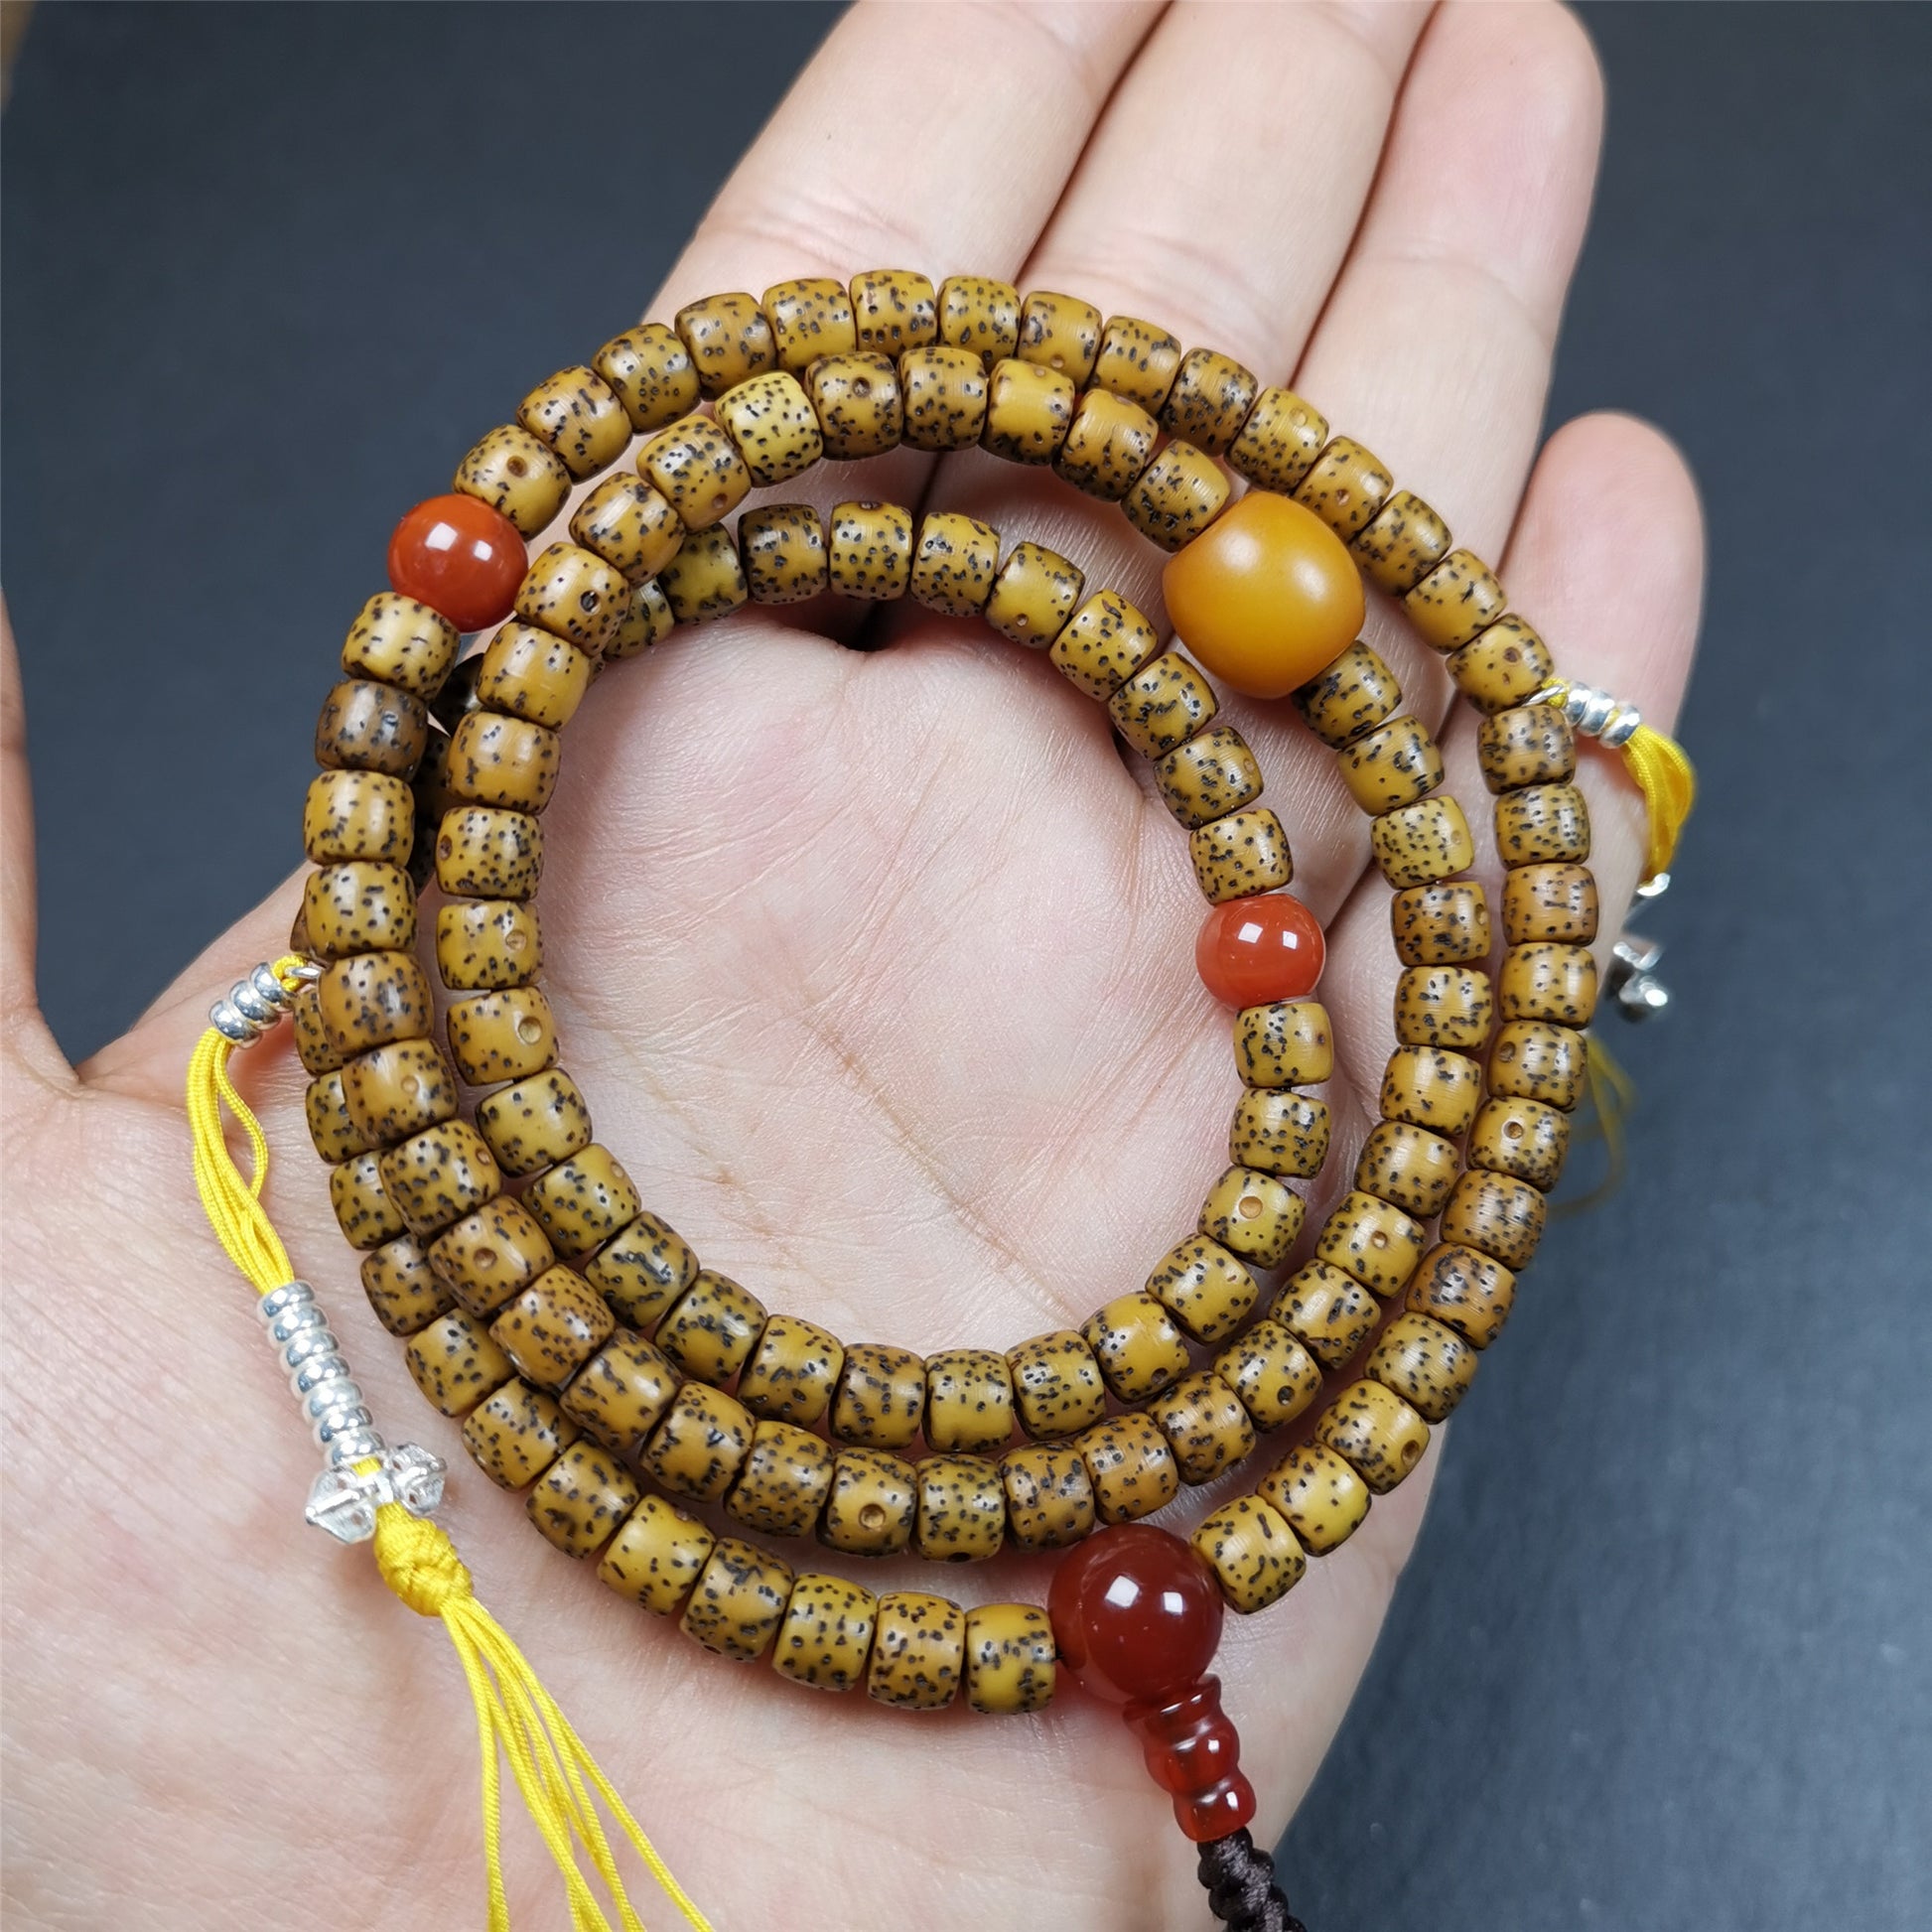 This old lotus seed mala was handmade from tibetan crafts man in Baiyu County,about 20 years old. It's composed of 108 lotus seed beads,then add some agate beads,1 pair of silver bead counters,and agate guru bead on it.